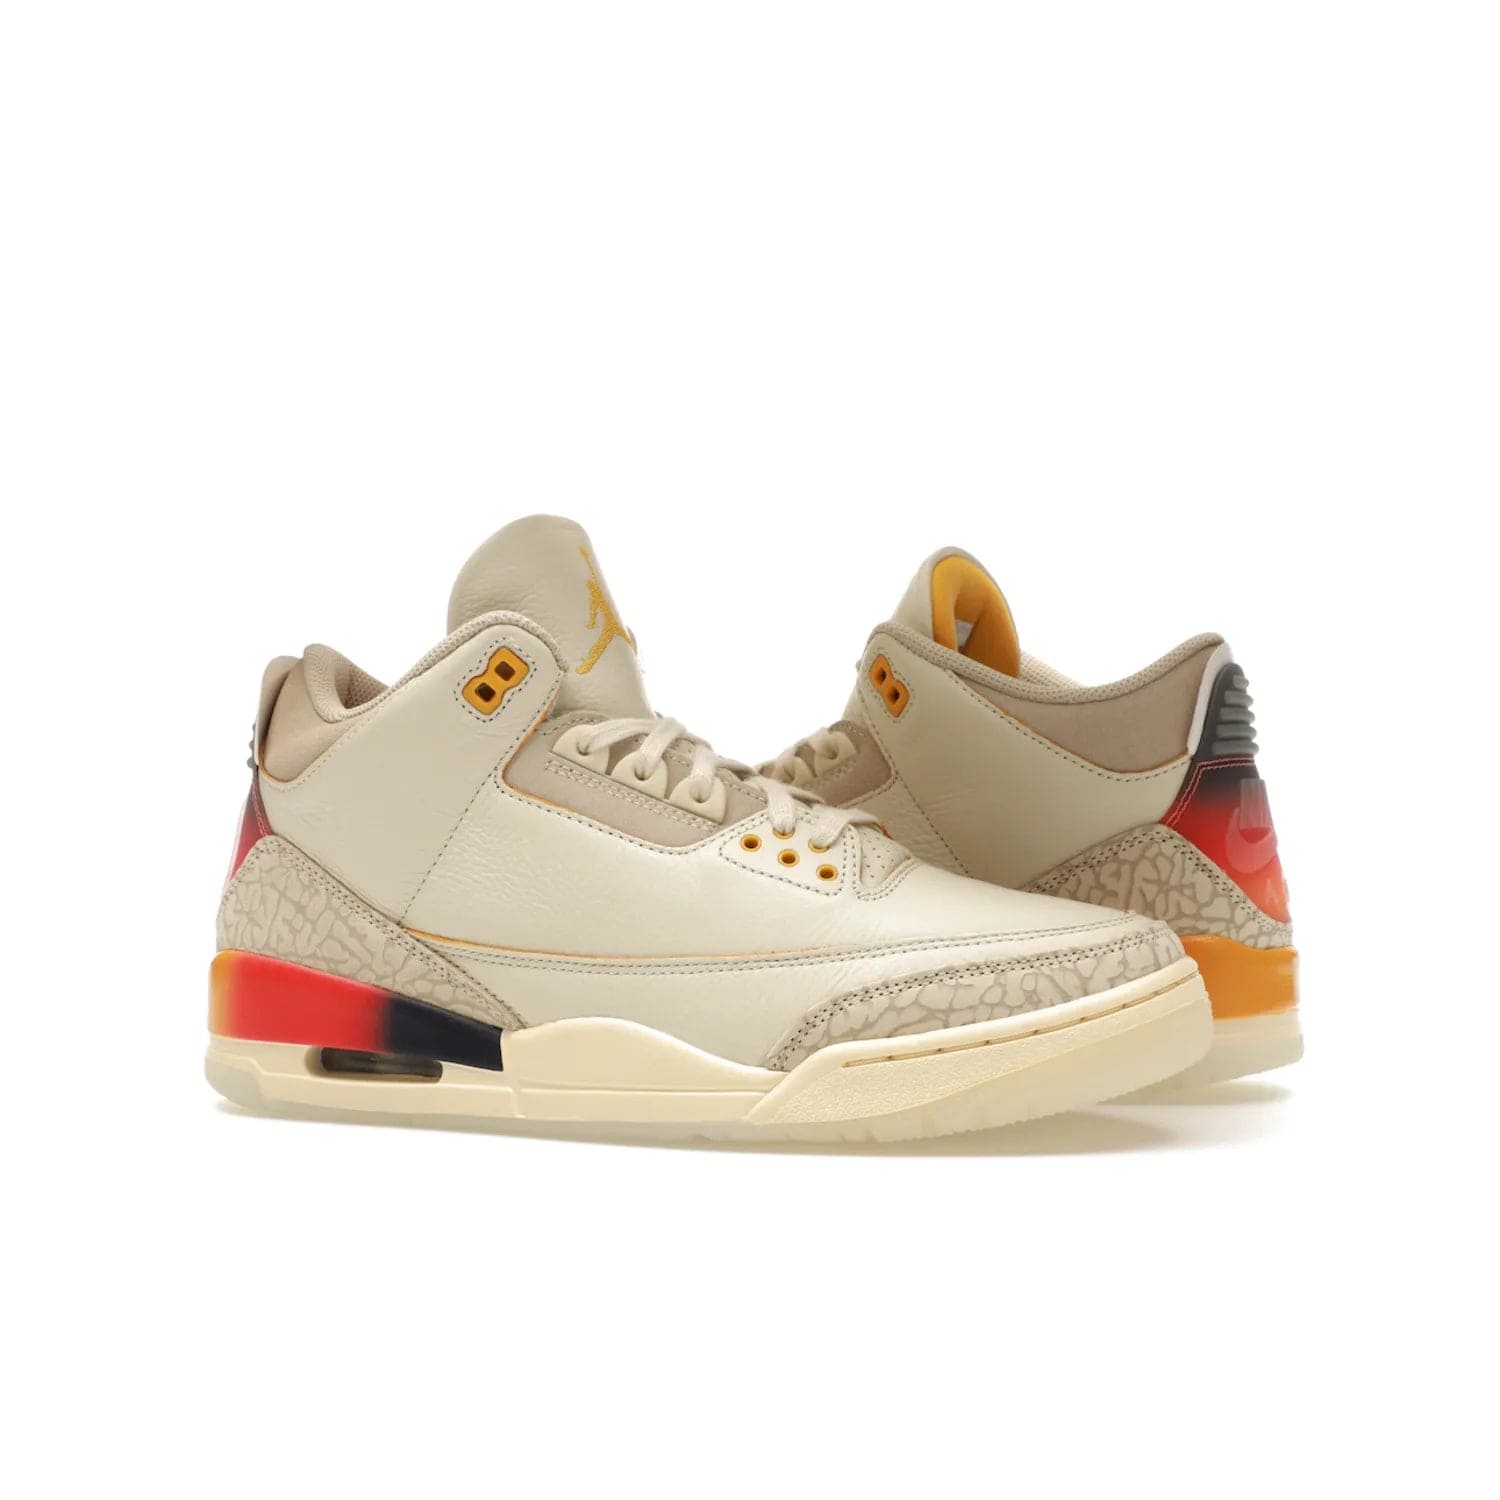 Jordan 3 Retro SP J Balvin Medellín Sunset - Image 3 - Only at www.BallersClubKickz.com - J Balvin x Jordan 3 Retro SP: Celebrate the joy of life with a colorful, homage to the electrifying reggaeton culture and iconic Jordan 3. Limited edition, Sept. 23. $250.